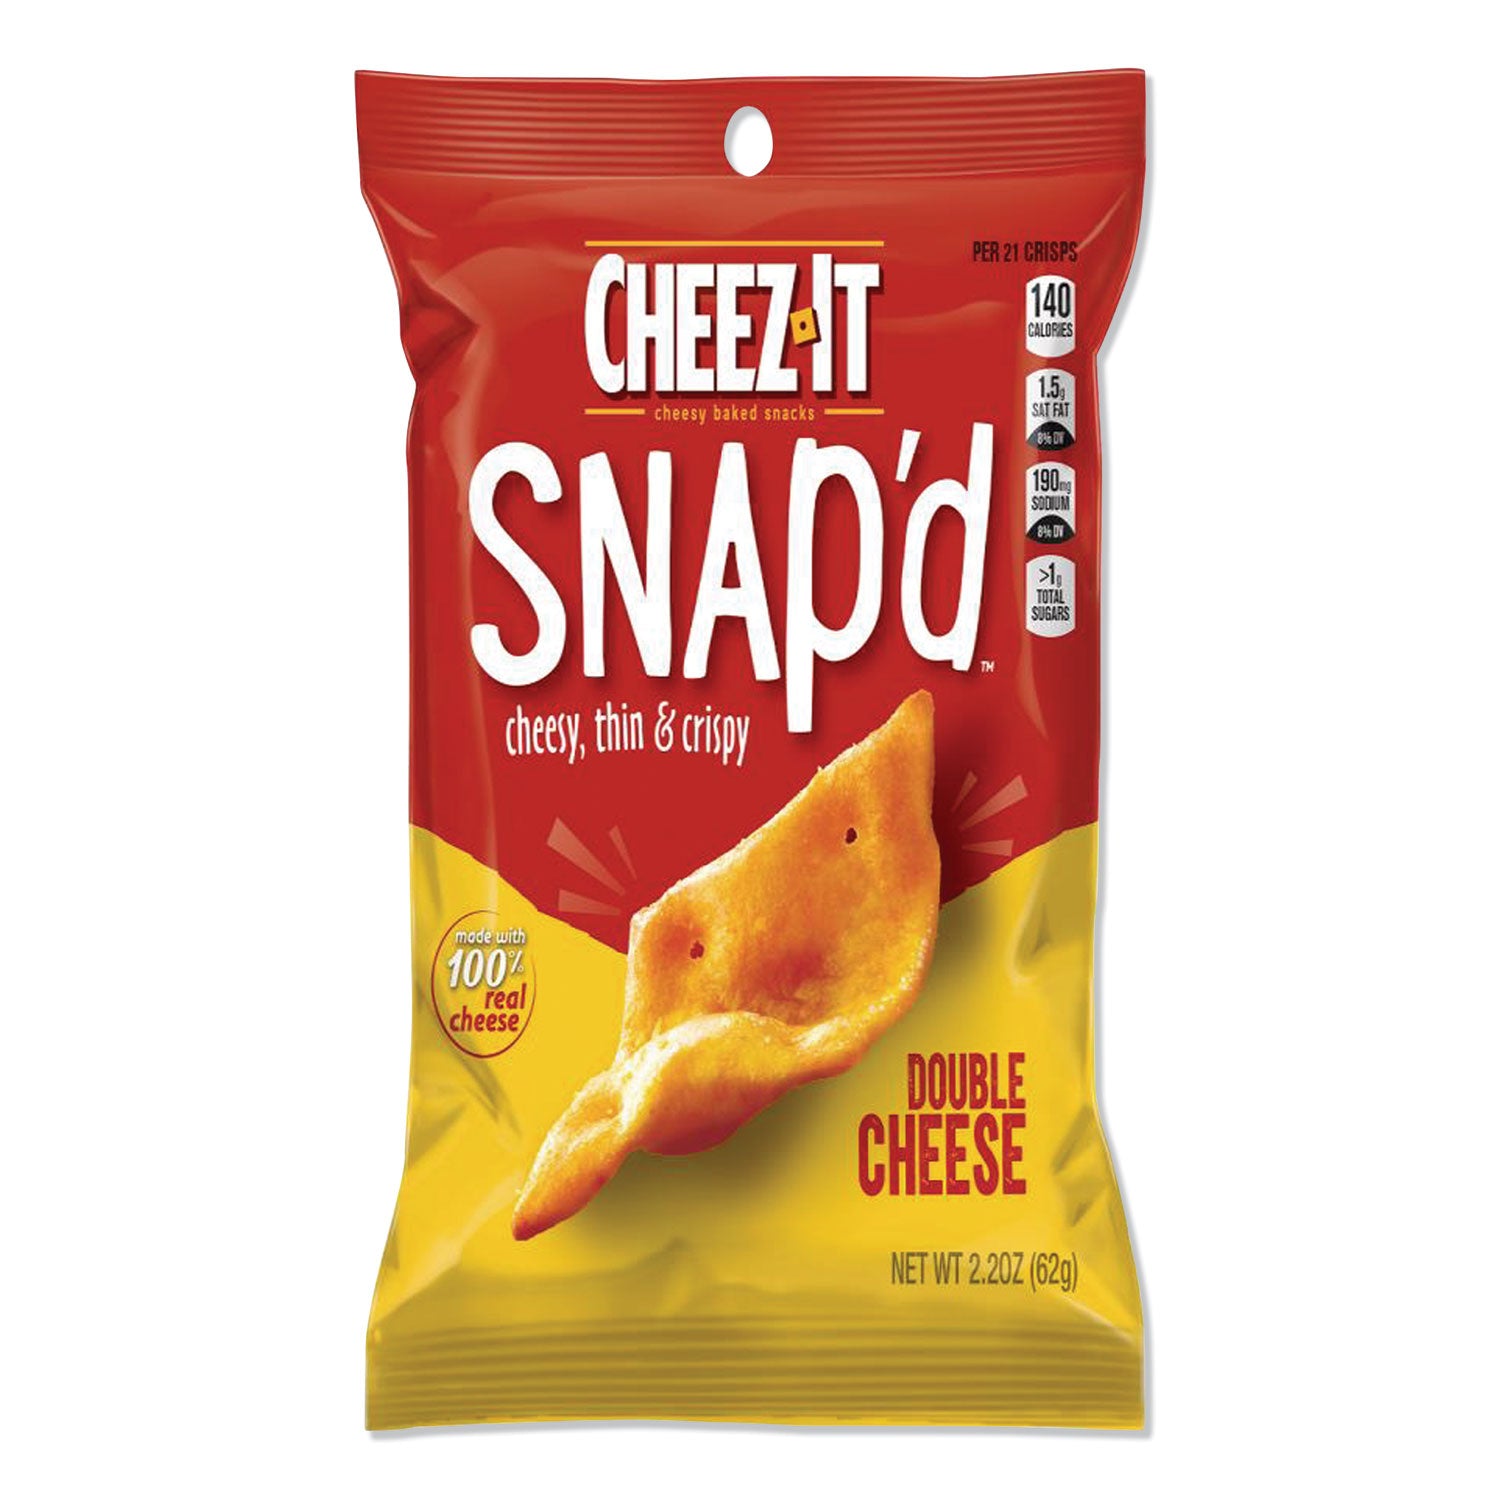 cheez-it-snapd-crackers-double-cheese-22-oz-pouch-6-pack_keb11422 - 1